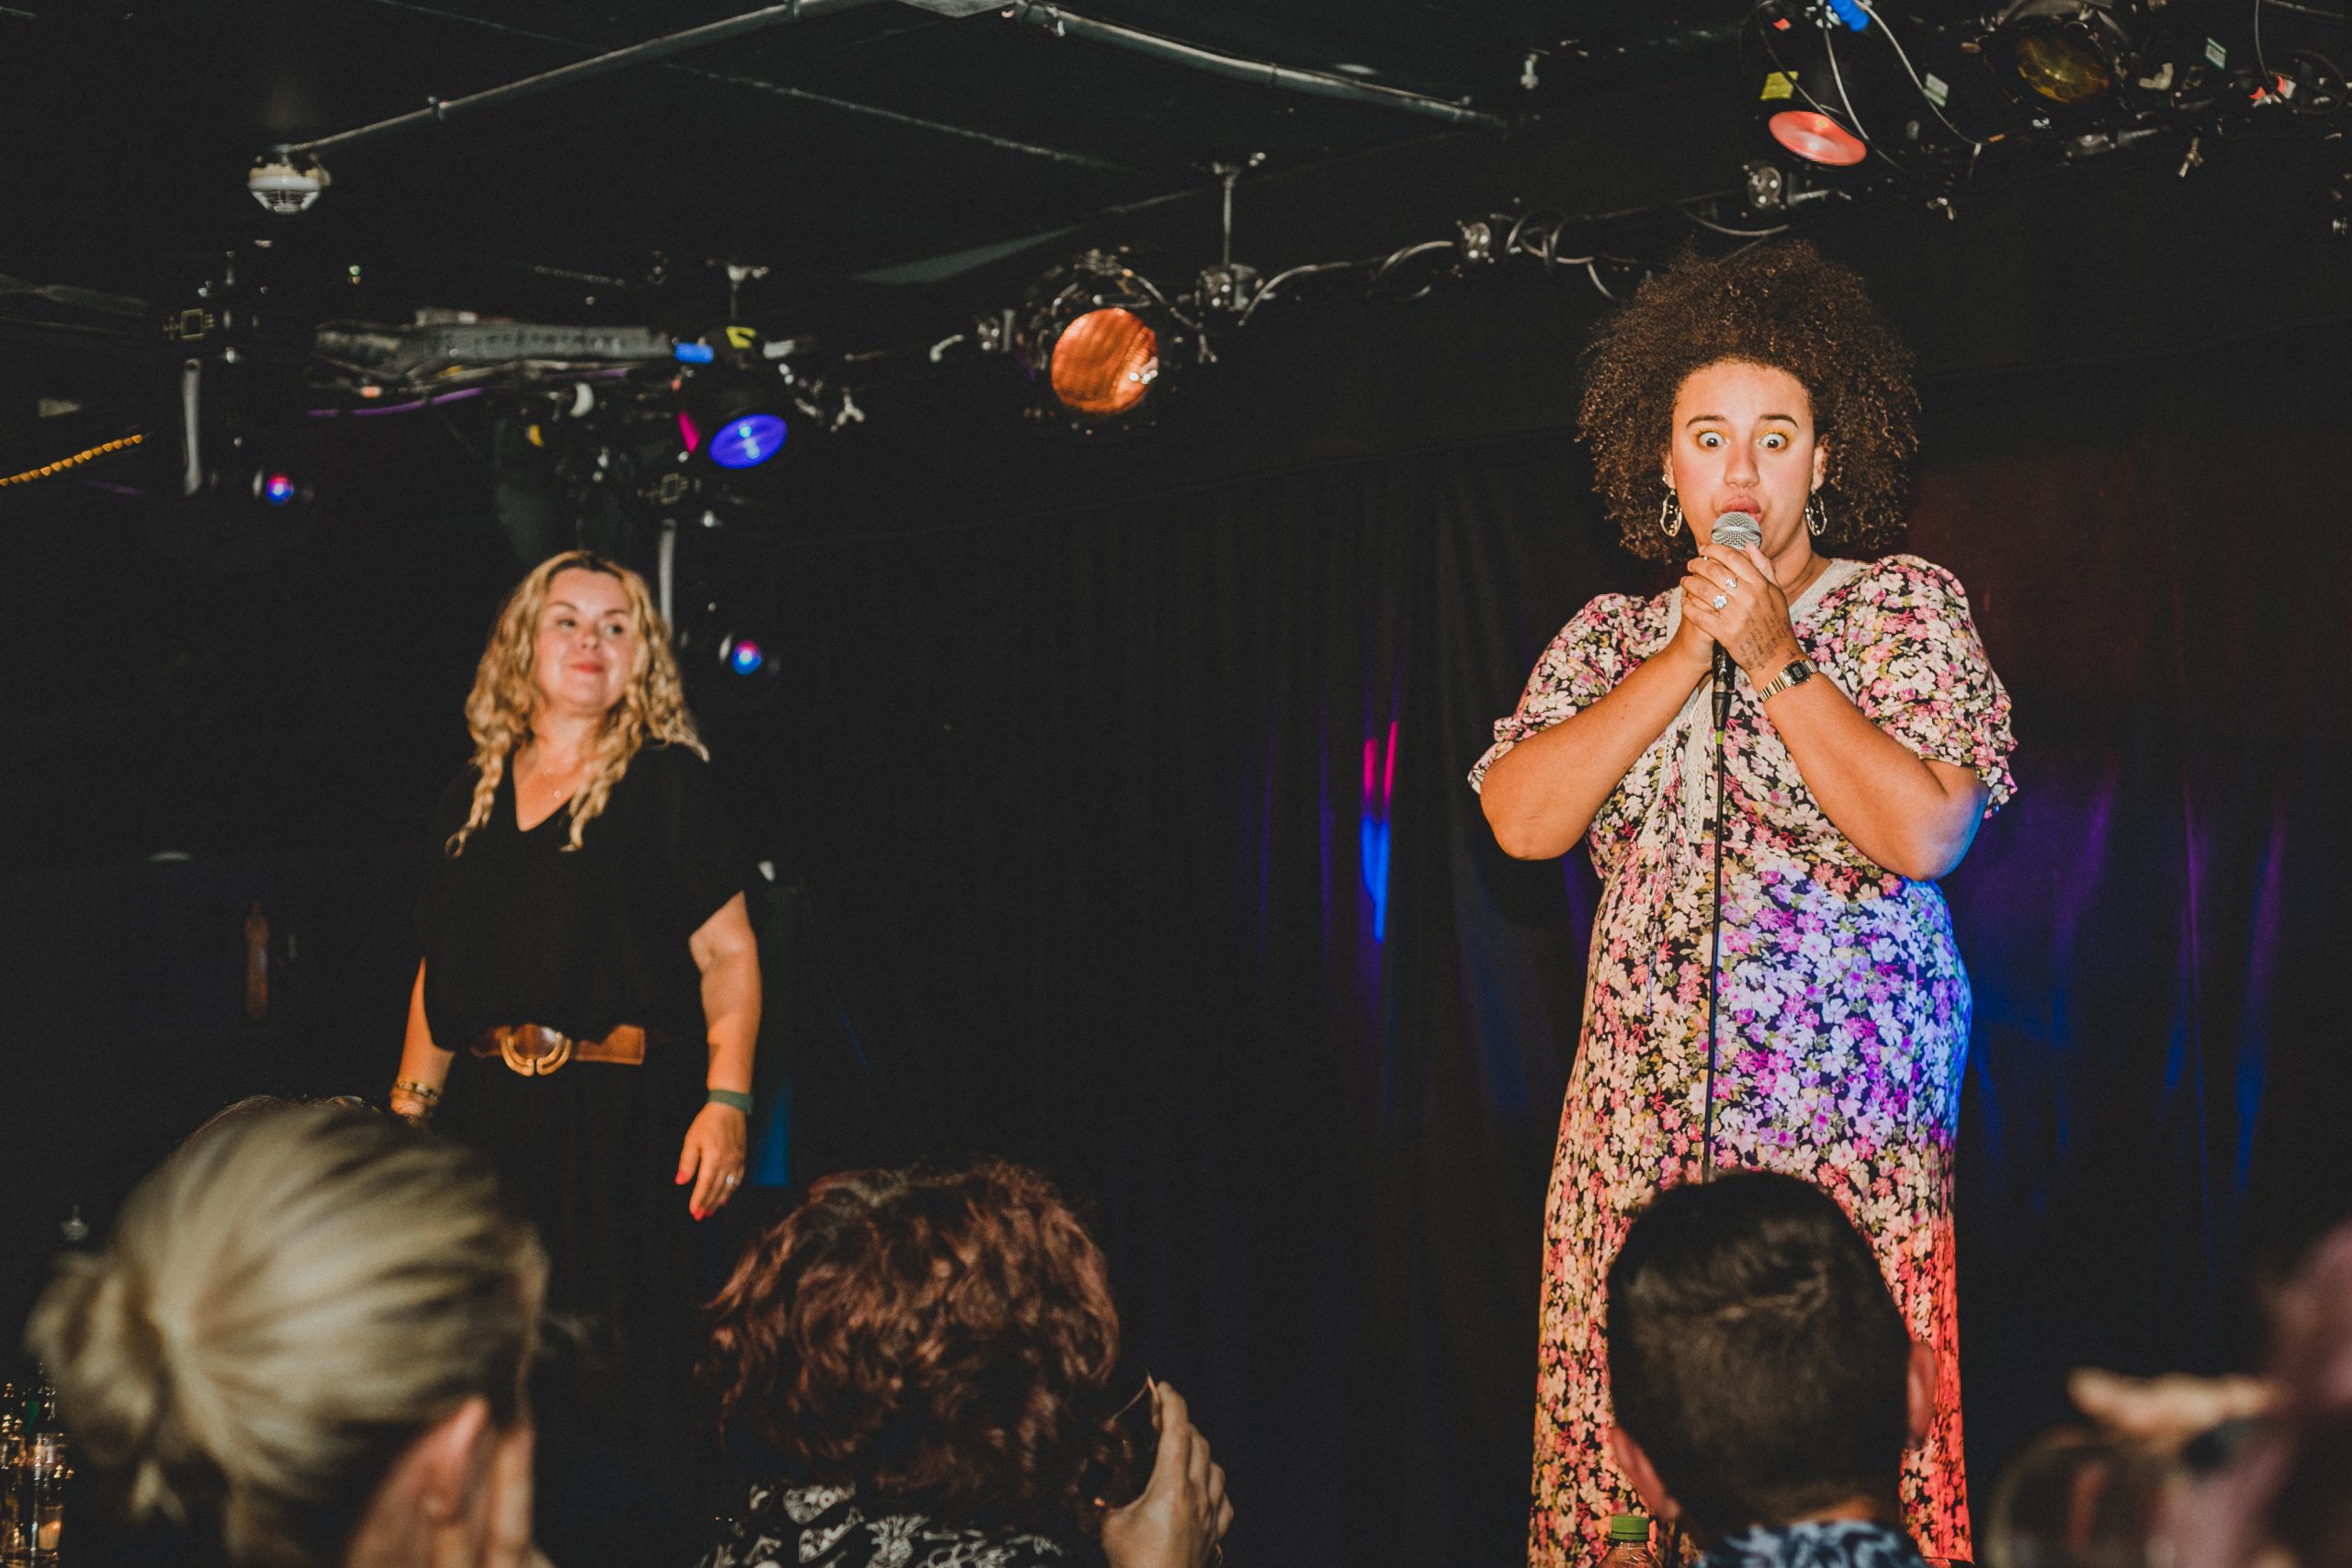 Emily Bampton, stand up comedian is on stage, wearing a floral maxi dress, she has curly afro hair and is holding the mic to her mouth. Standing to the right is Paula (BSL signer) who is wearing a black jumpsuit and has blonde long wavy hair